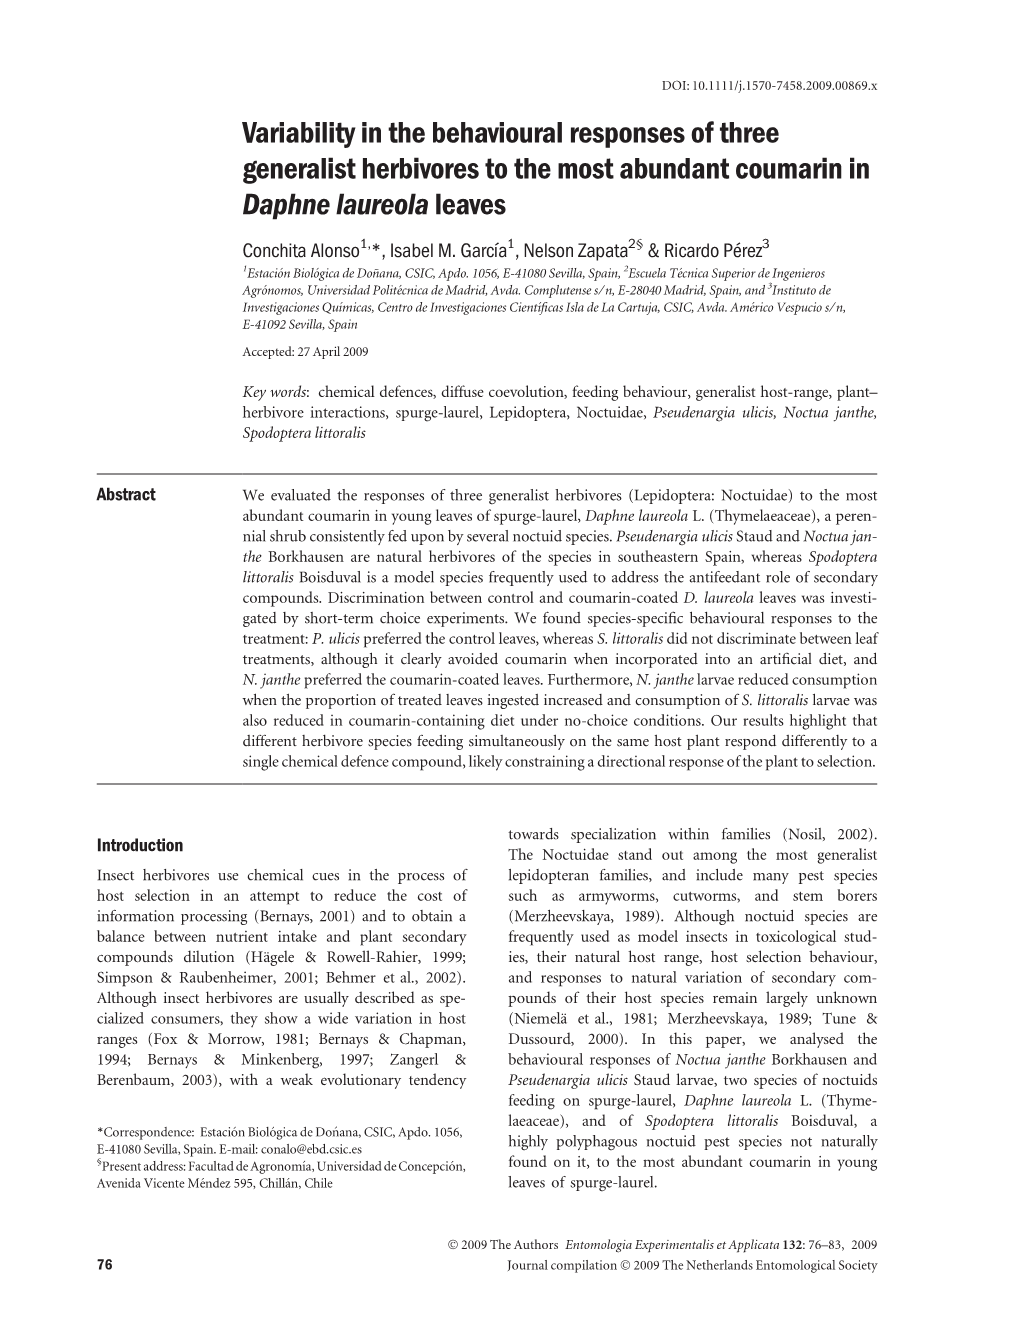 Variability in the Behavioural Responses of Three Generalist Herbivores to the Most Abundant Coumarin in Daphne Laureola Leaves